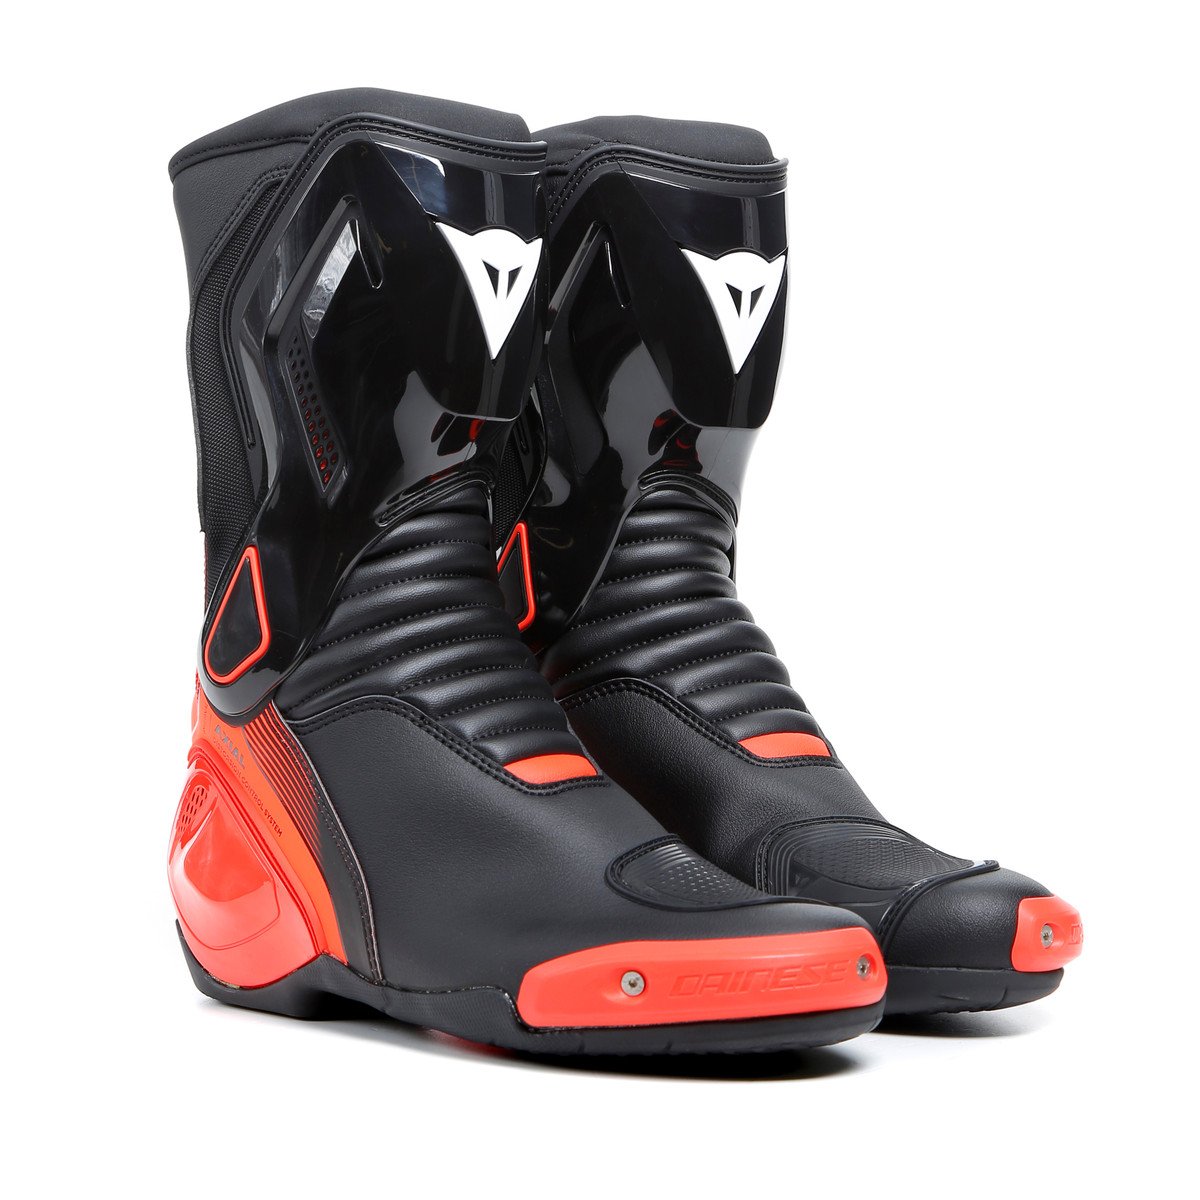 Image of Dainese Nexus 2 Boots Black Fluo Red Size 46 EN